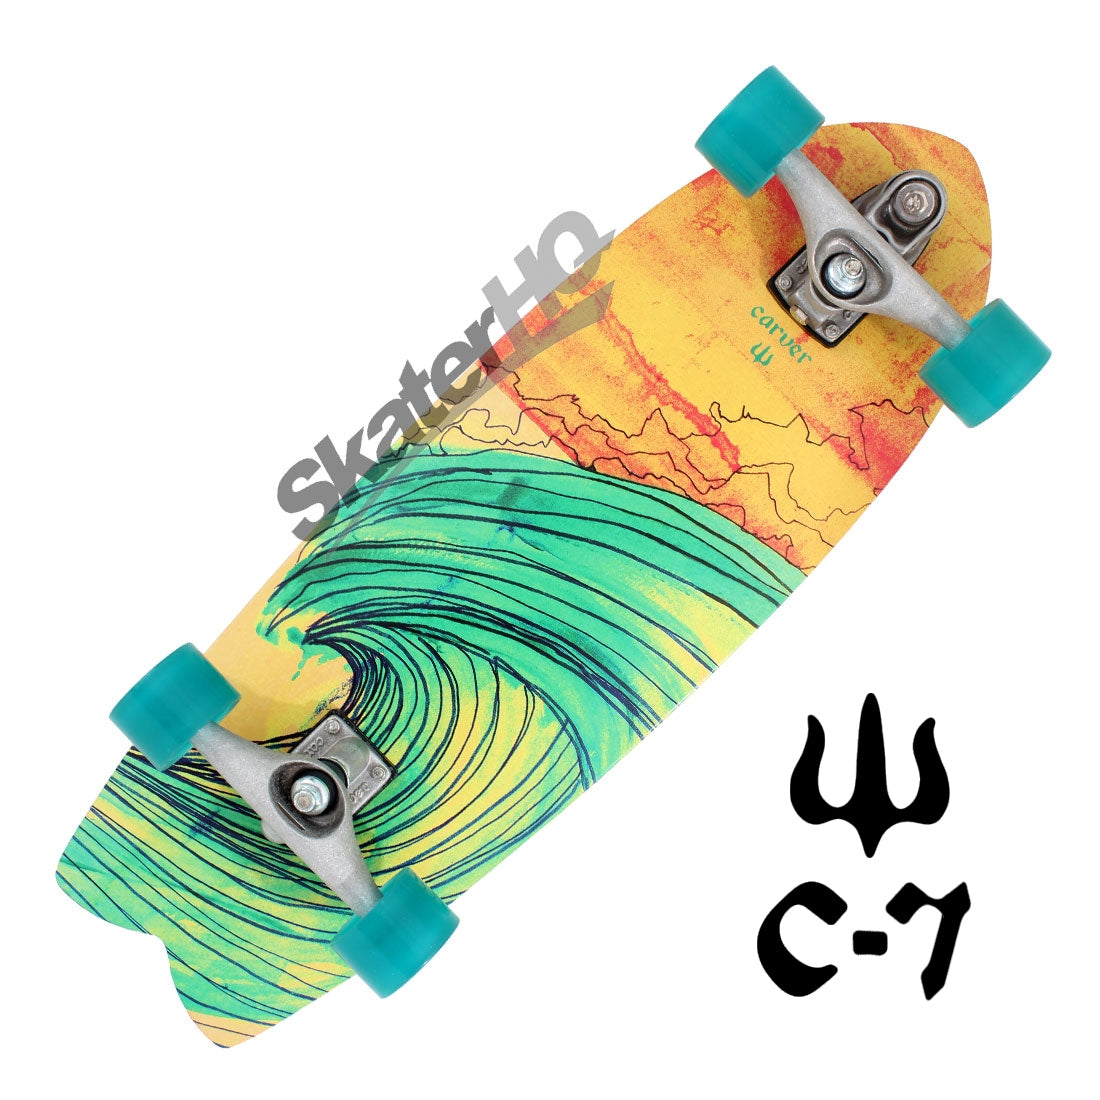 Carver Swallow C7 Raw Complete Skateboard Compl Carving and Specialty